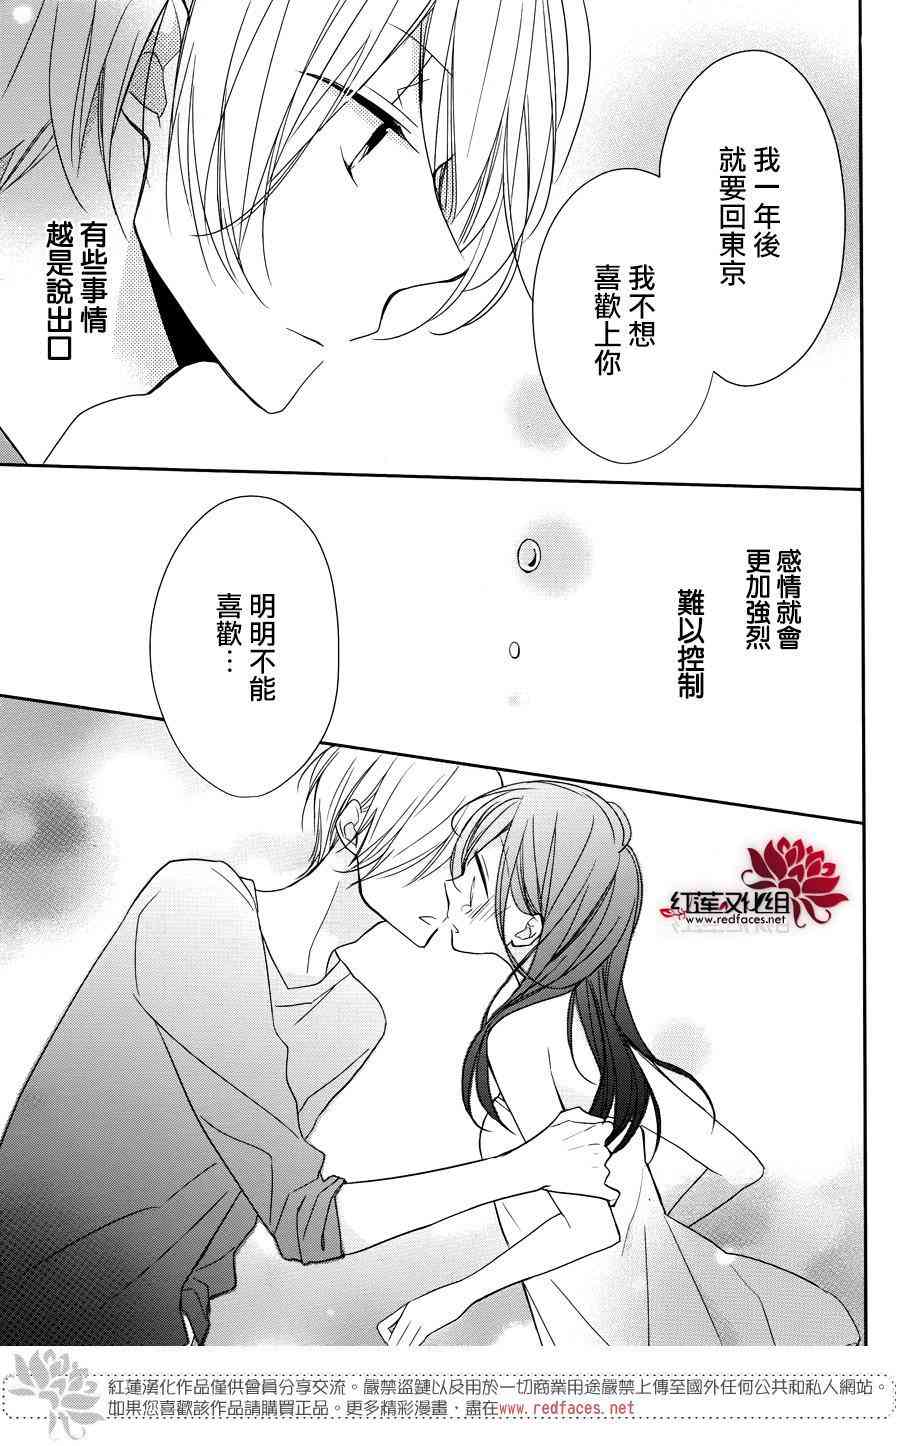 If given a second chance - 4话 - 7